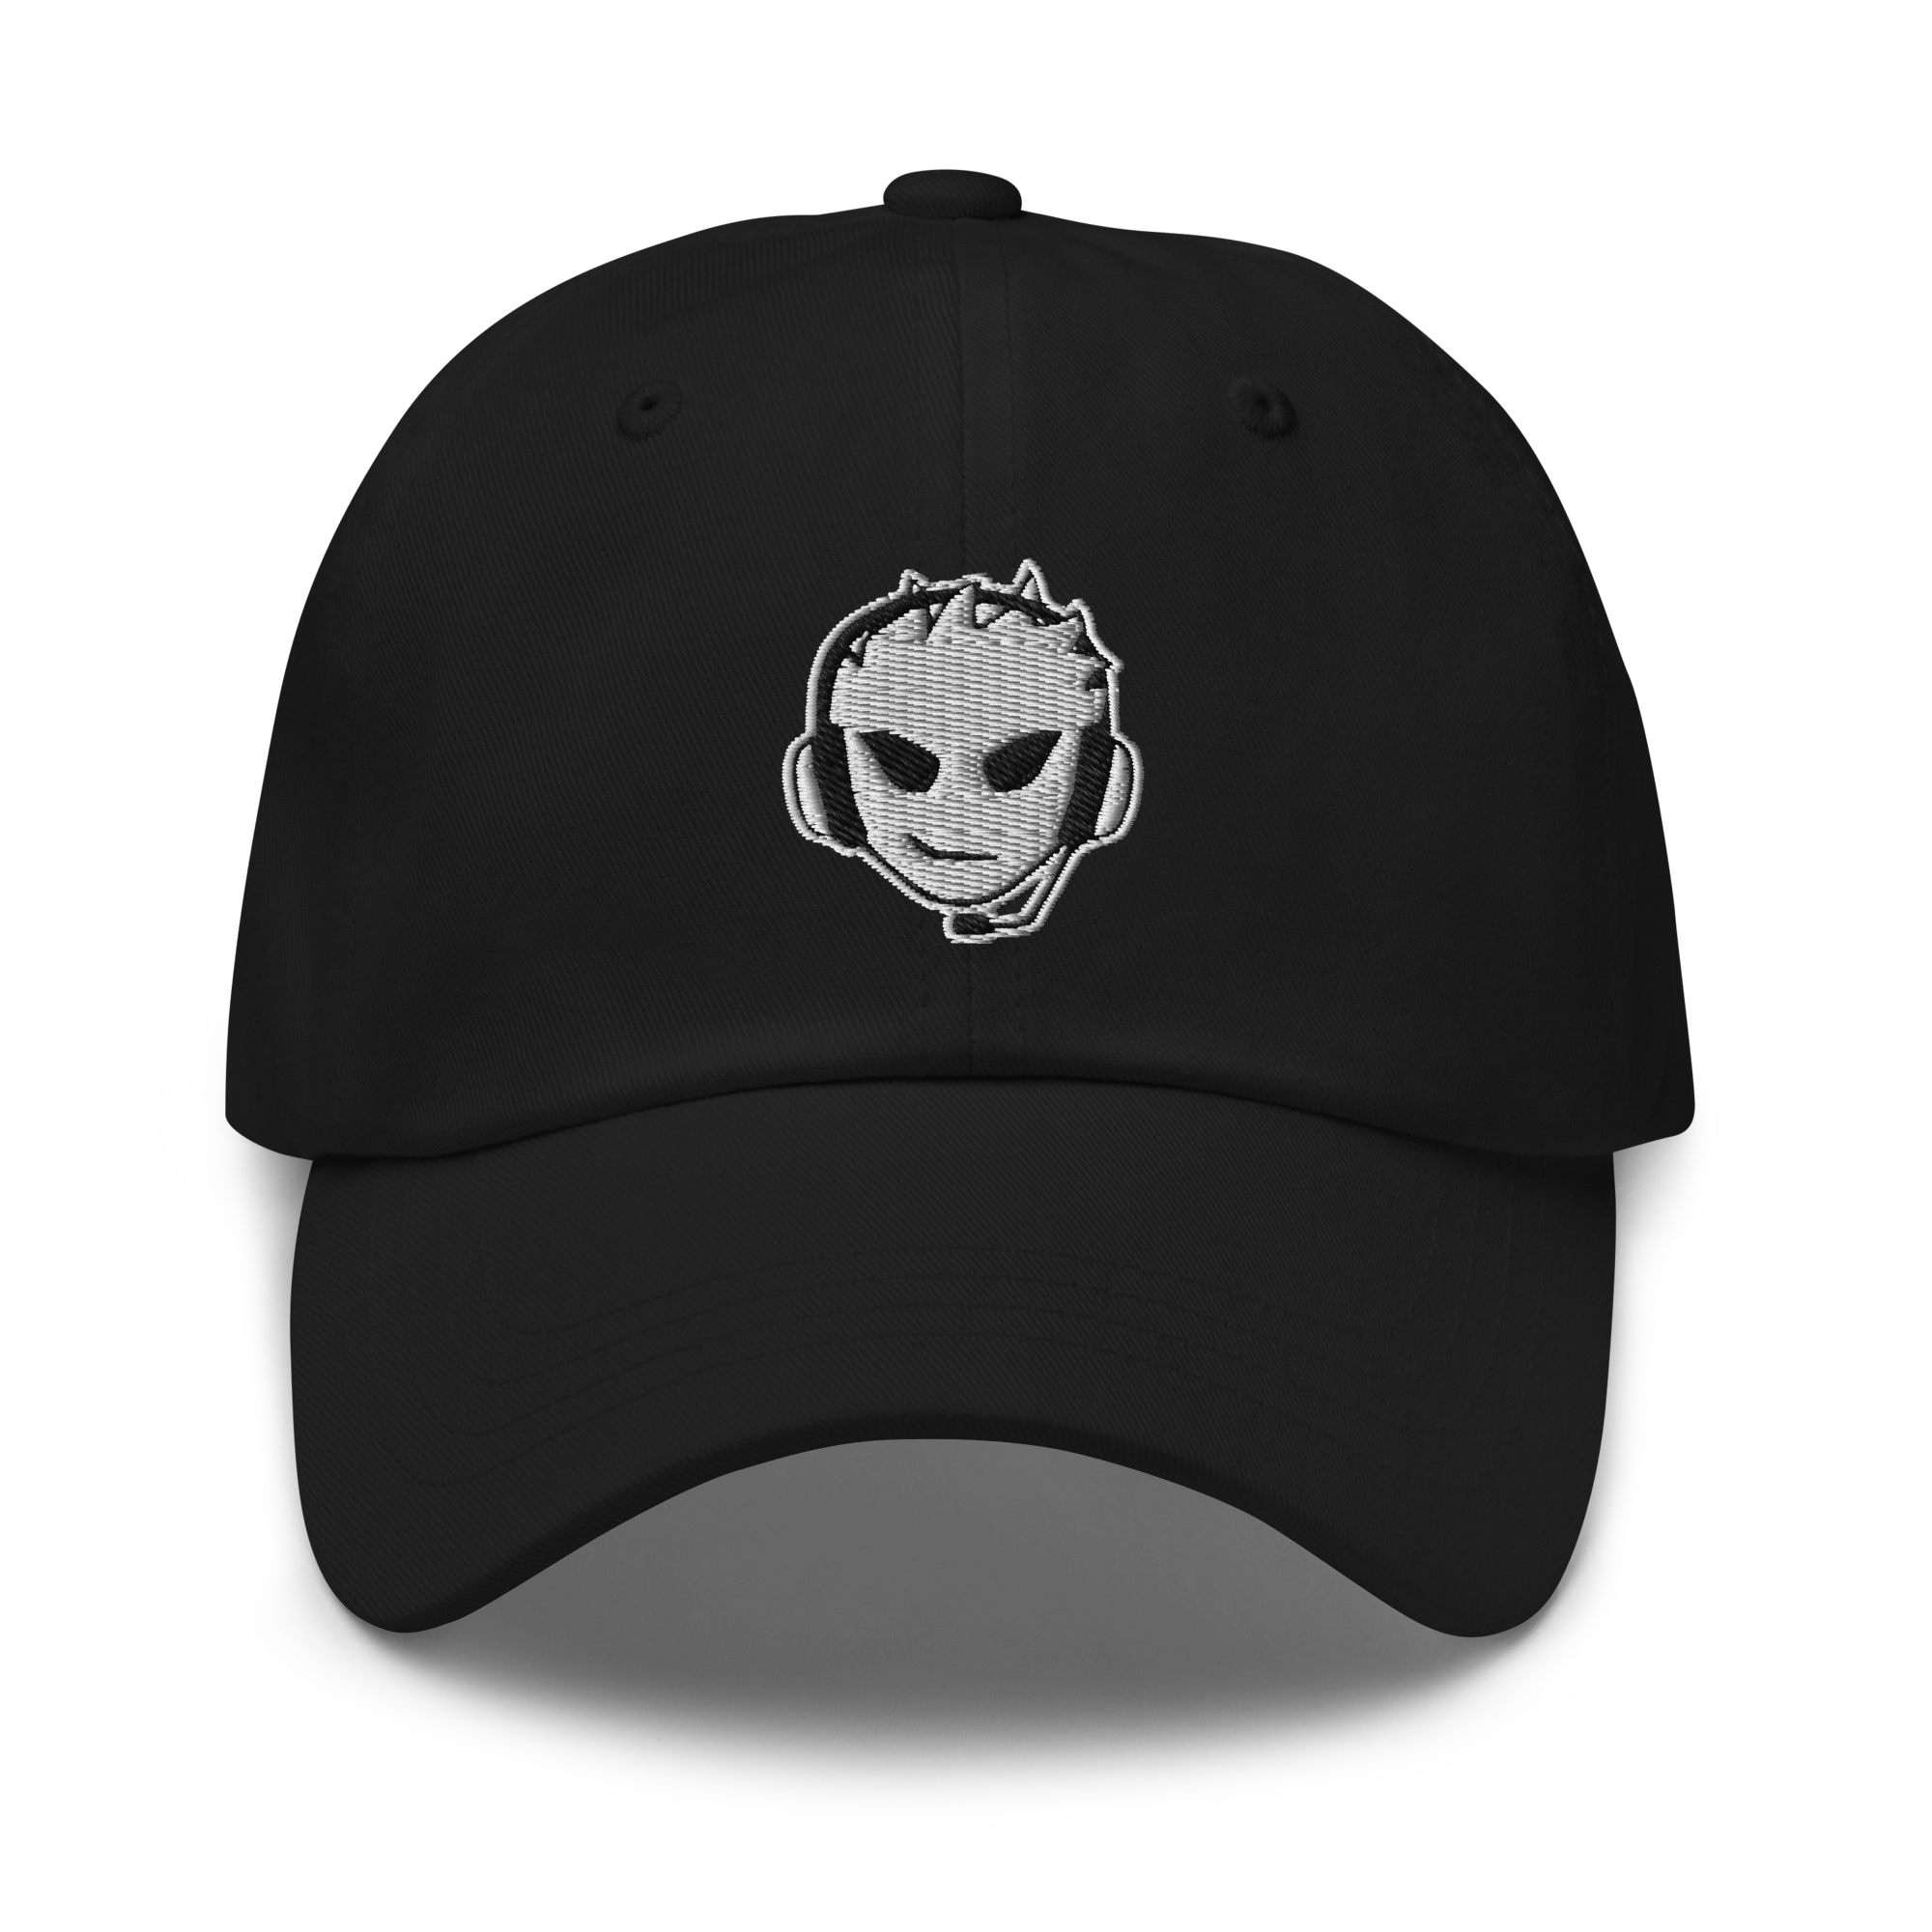 Player One Classic Hat